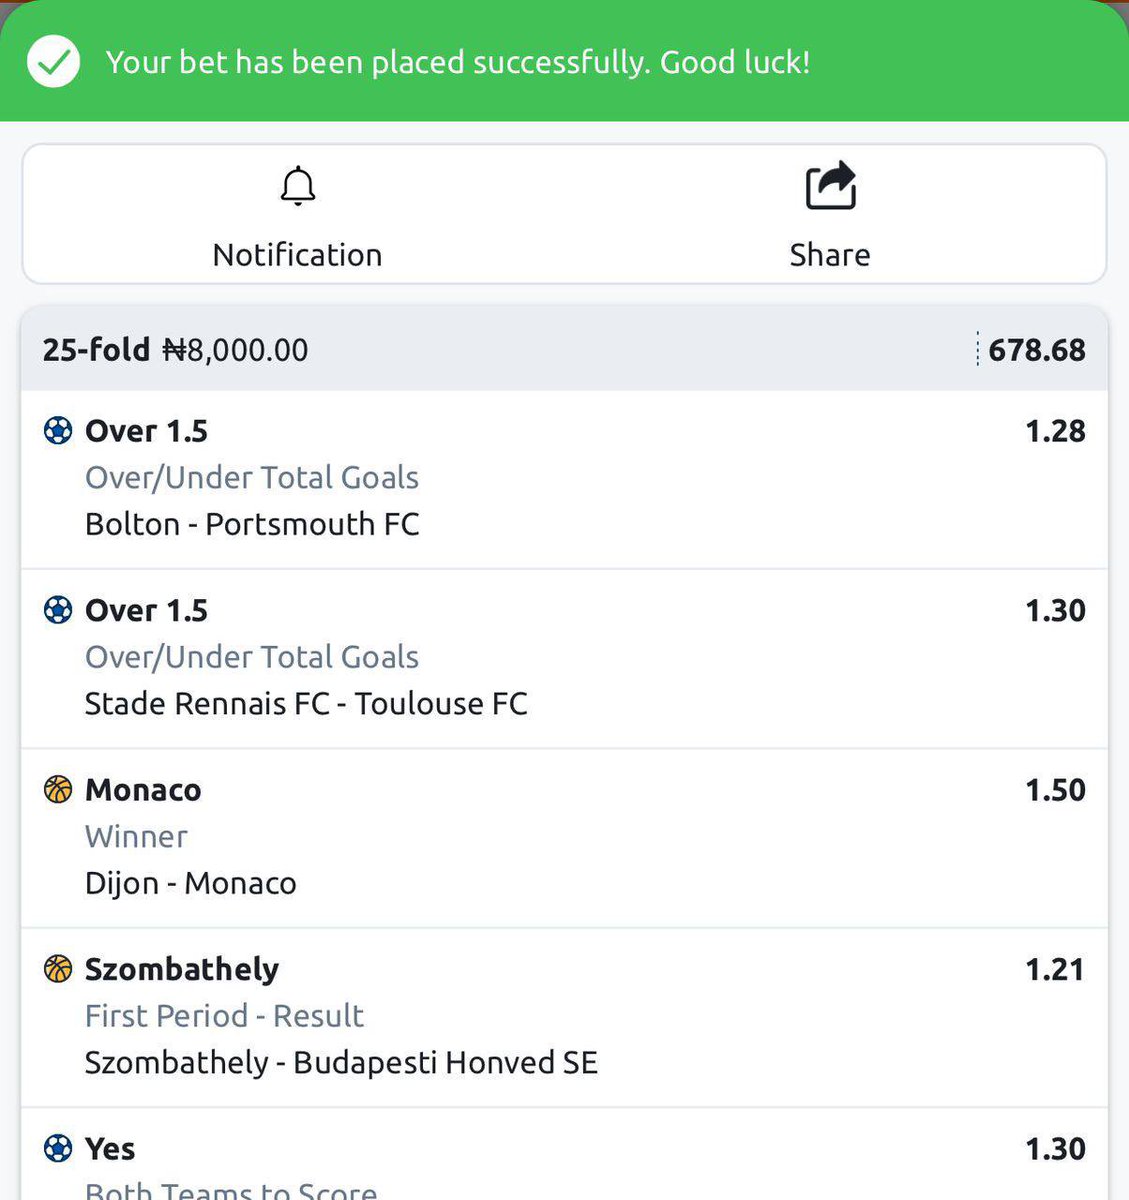 🔞700 odds !! BETANO 🎮 Register On BETANO with my link and get upto 50% up to N200,000 bonus on your first deposit Register here >> bit.ly/3N10MuR Code >> NUHQNTVJ Promocode: DAMOLA Stake Responsibly